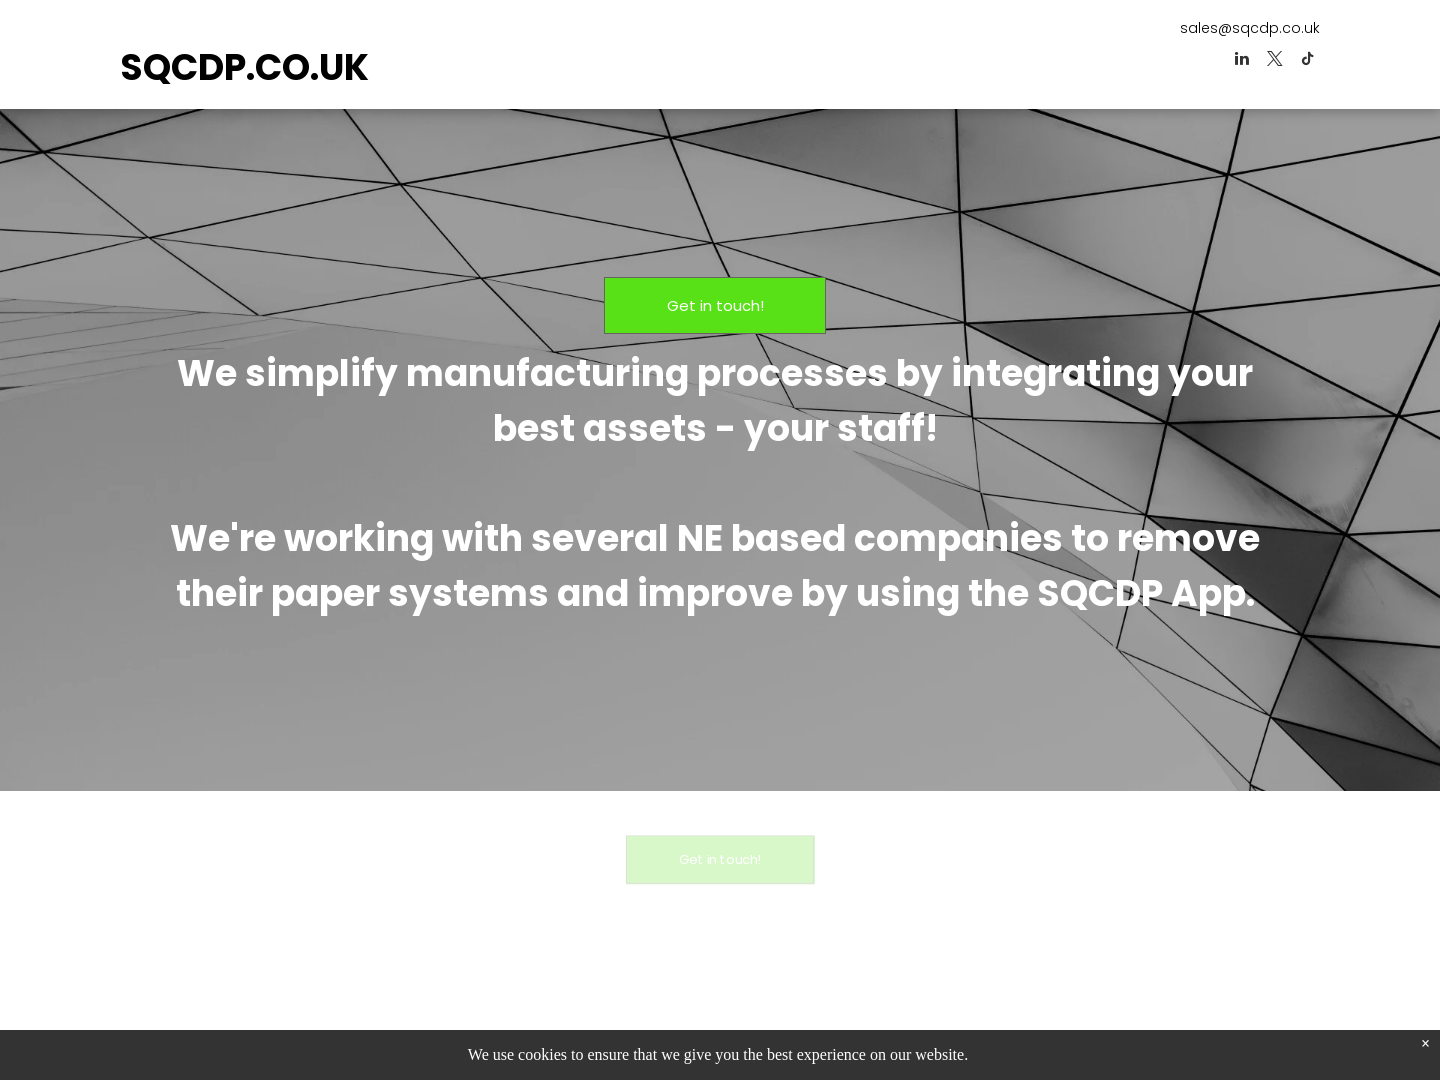 "SQCDP Secures £200k Funding to Revolutionize Manufacturing Efficiencies"